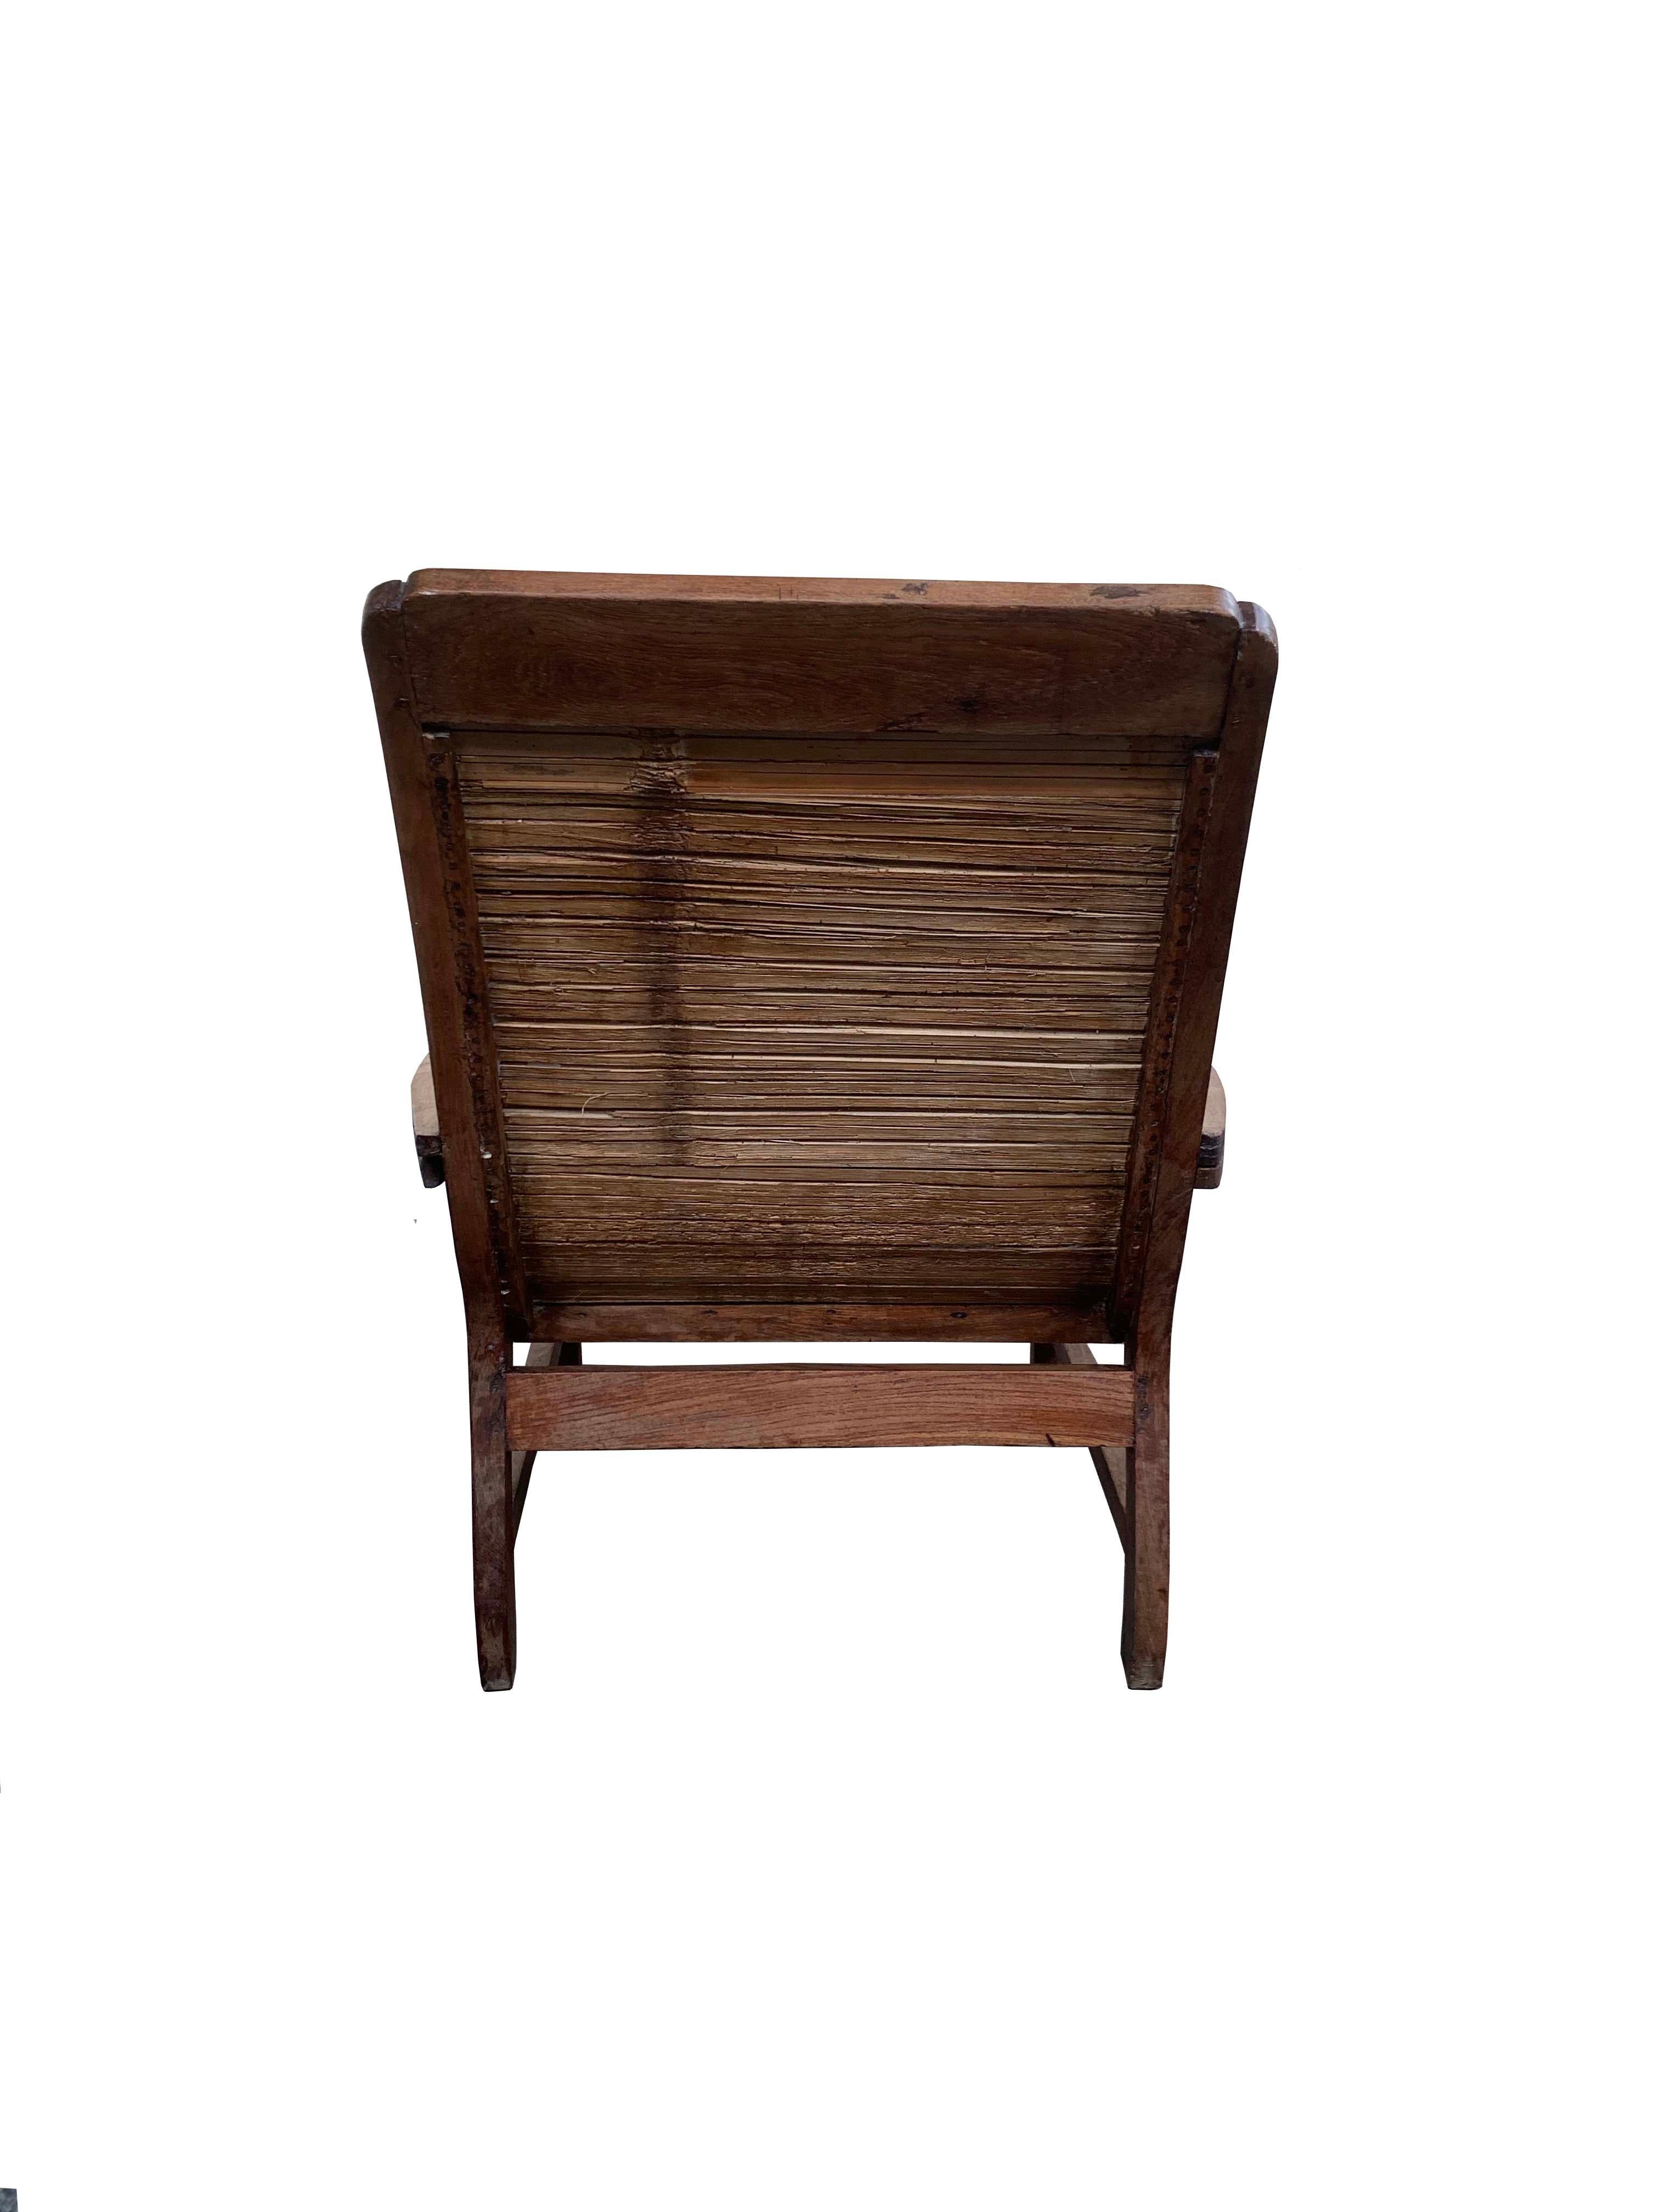 Hand-Crafted Colonial Solid Teak & Bamboo Plantation Chair with Leg Rests, Java, Indonesia